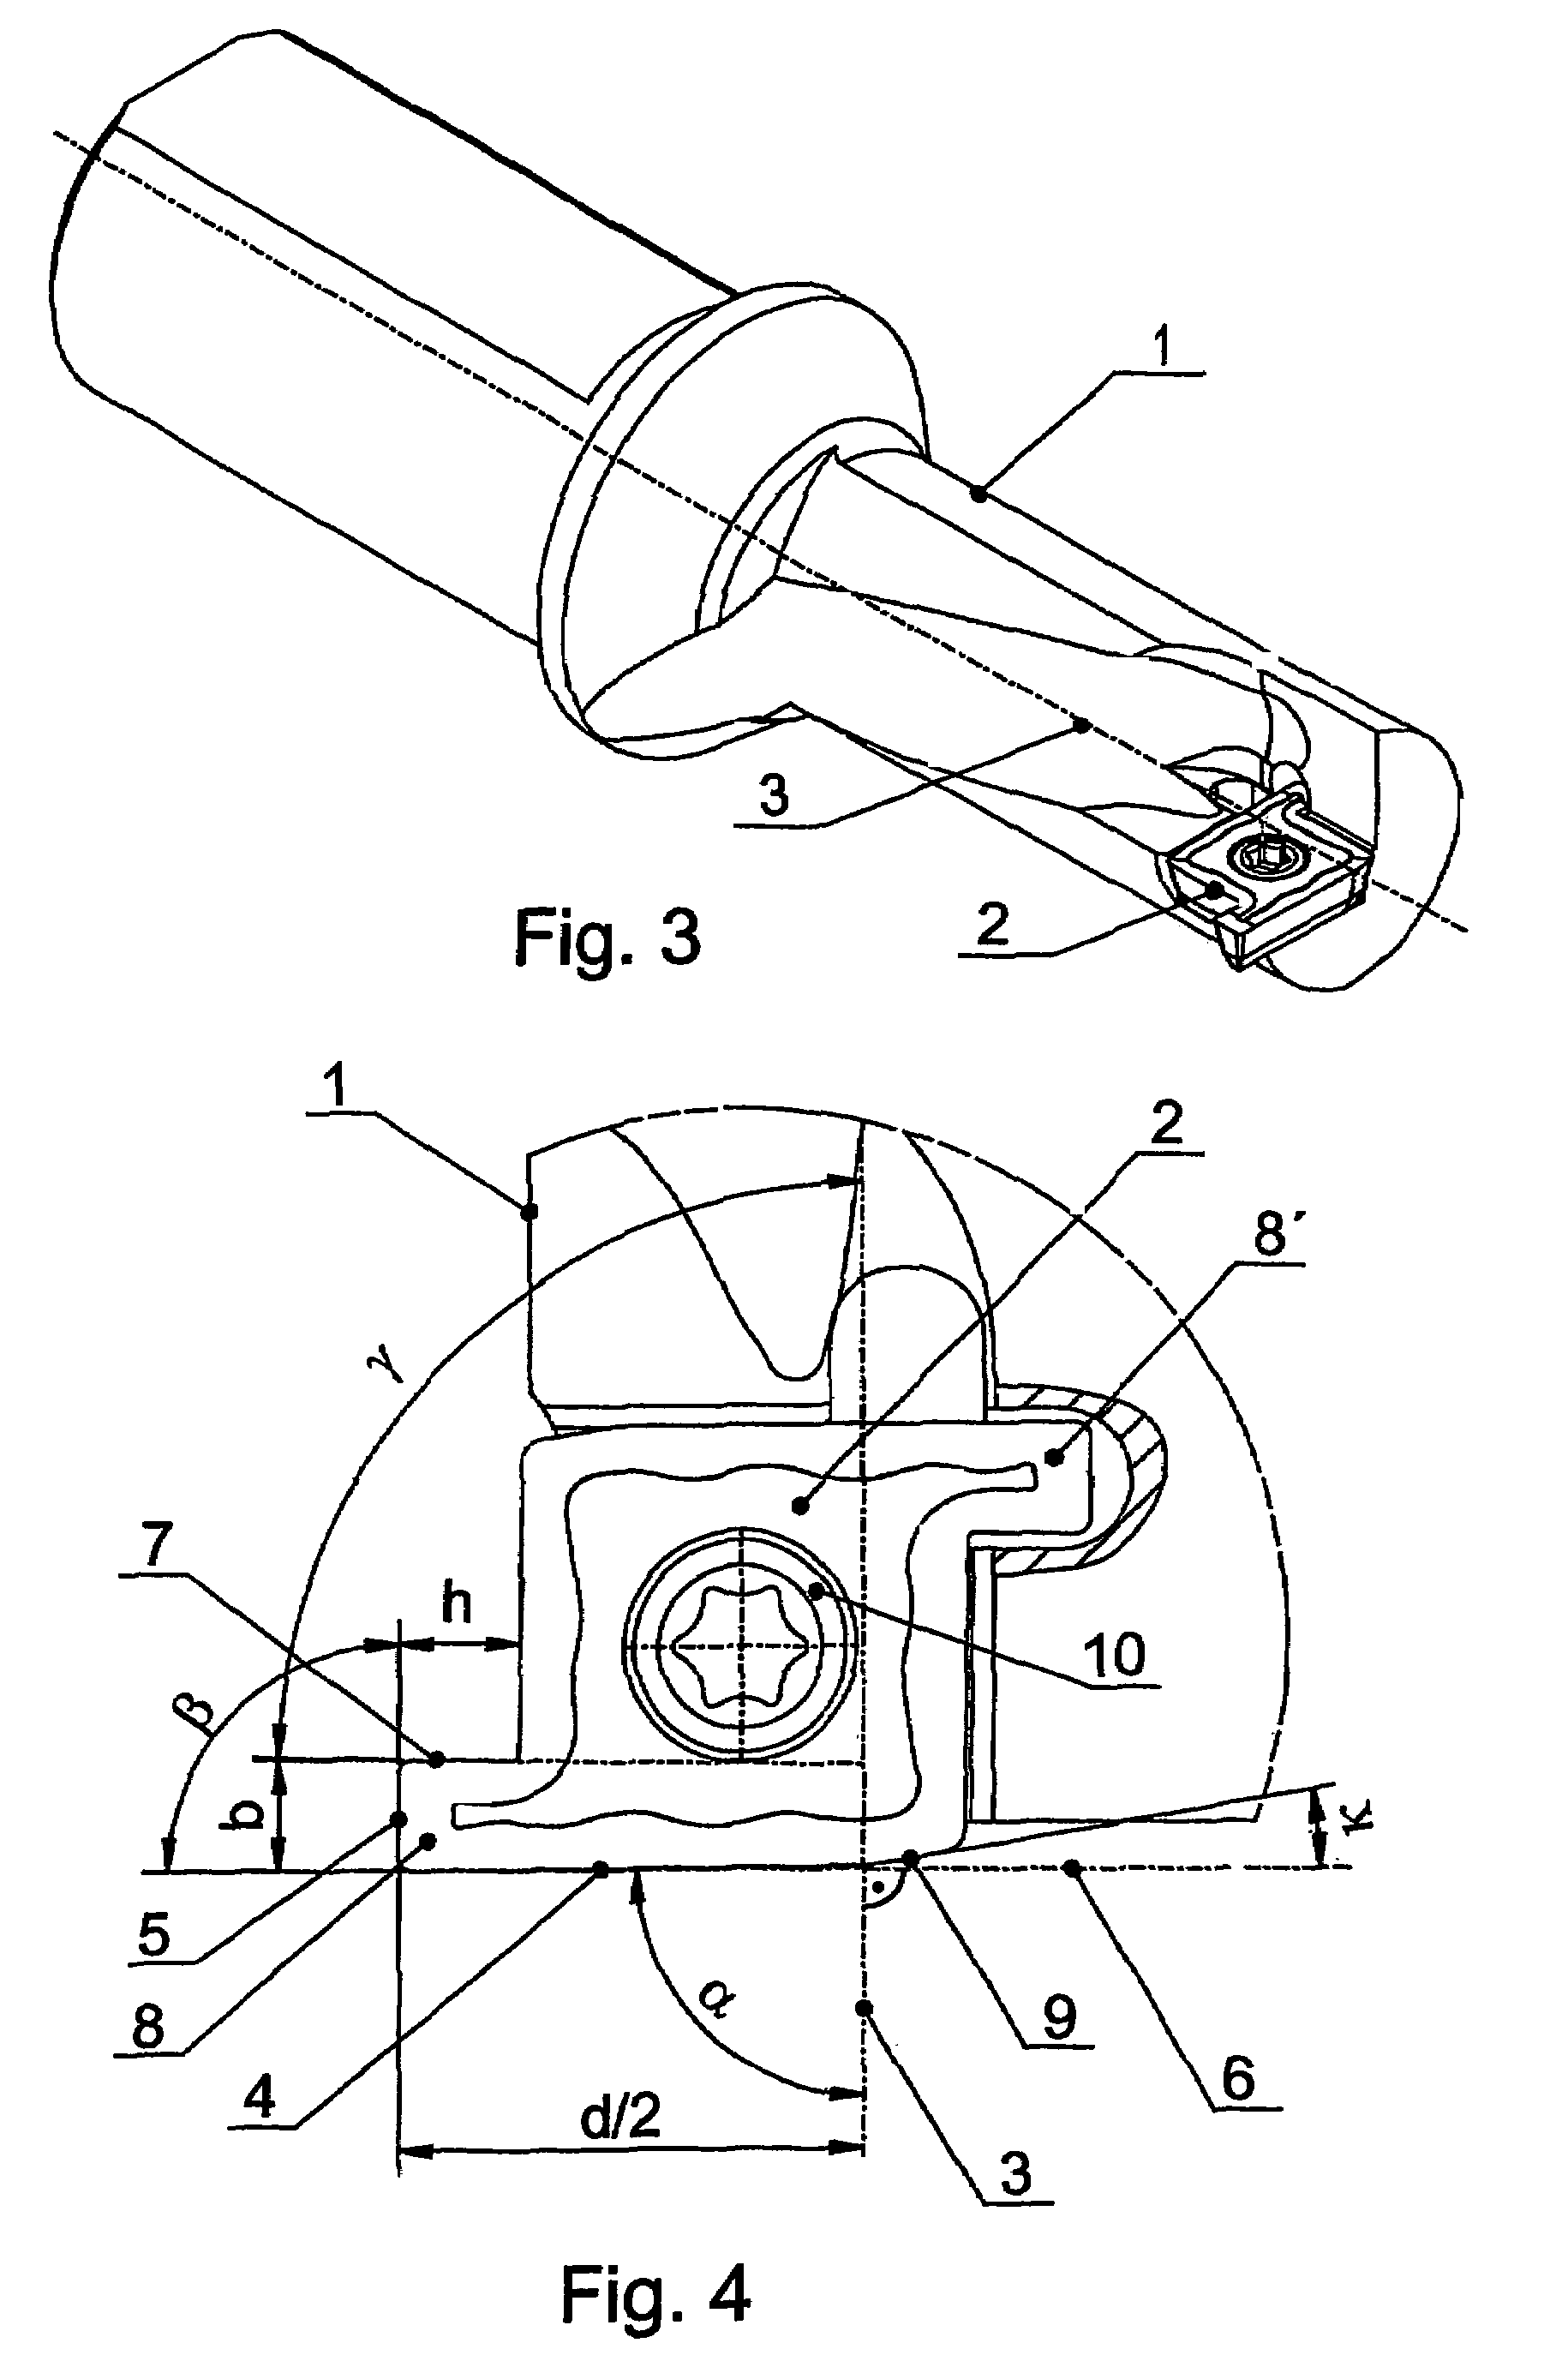 Cutting tool for rotating and drilling into solid blocks